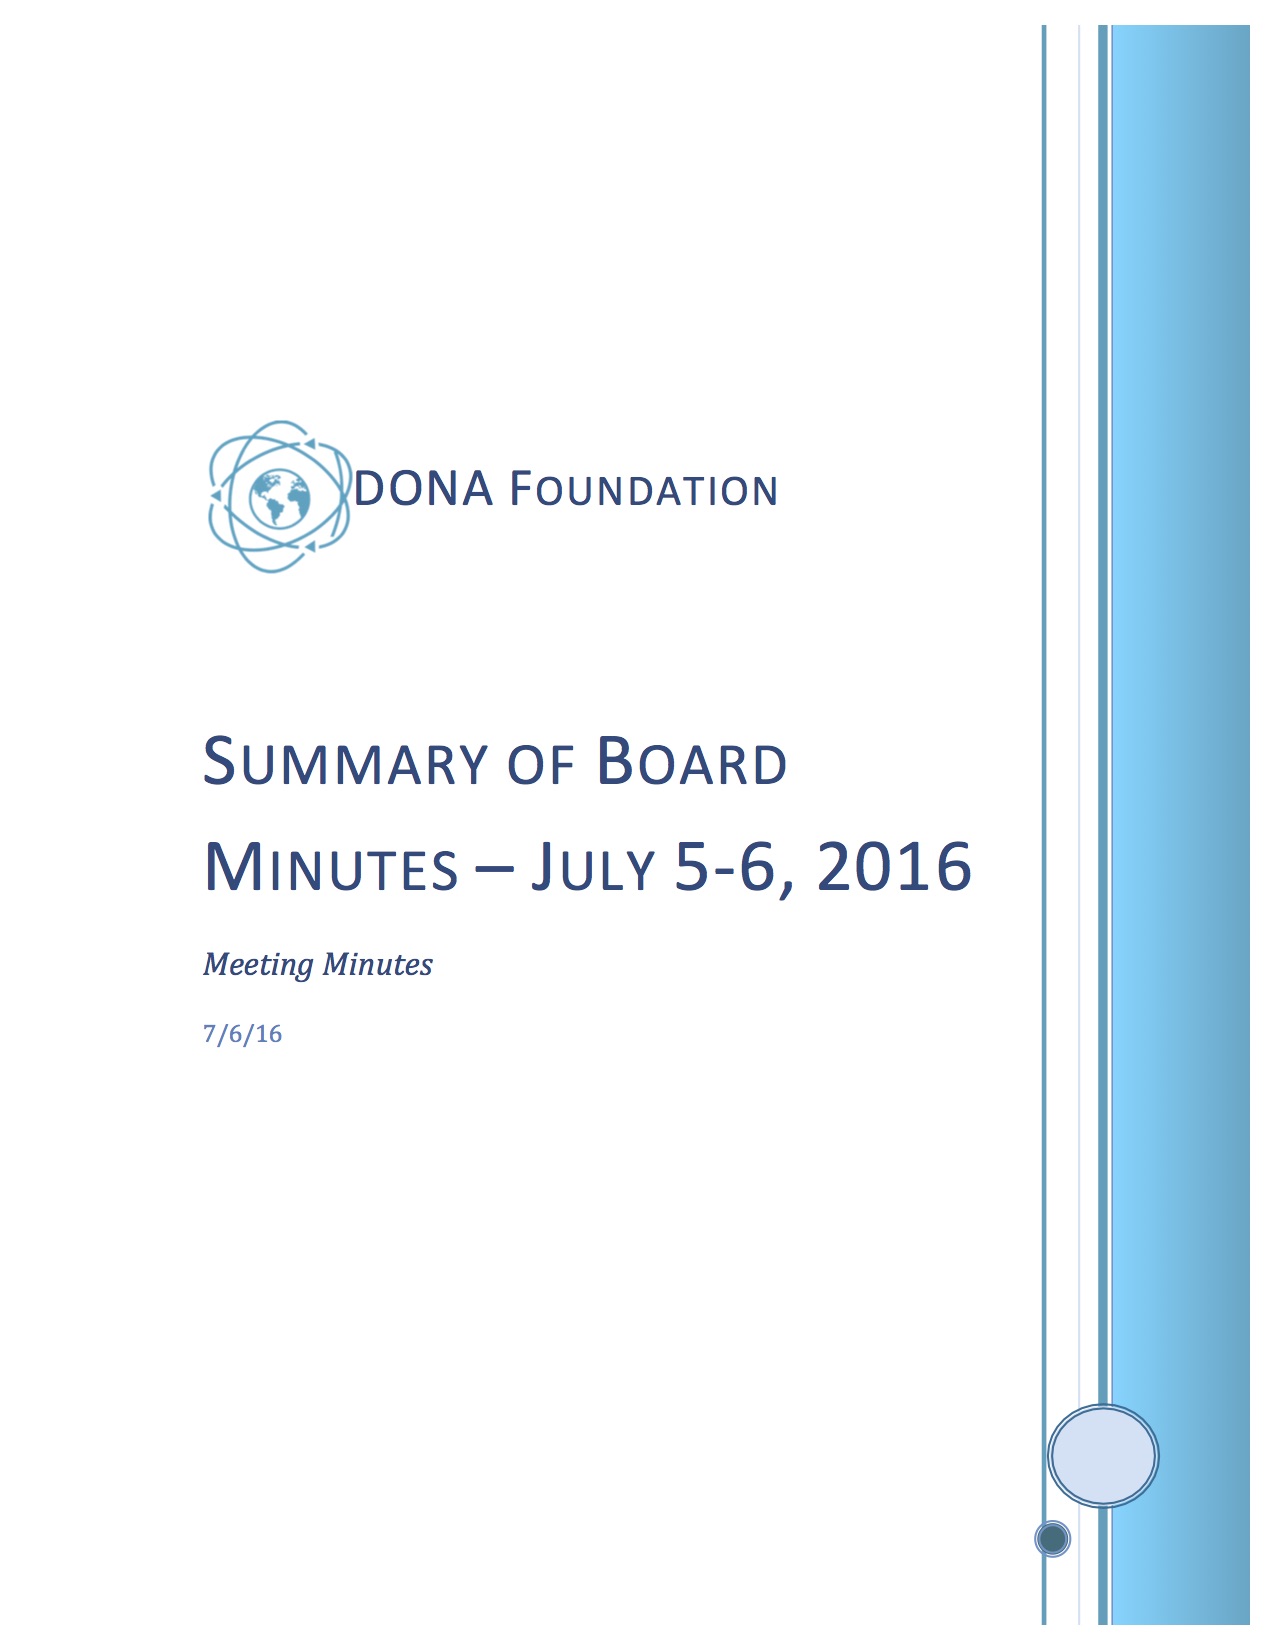  Summary of Board Minutes July 5-6, 2016